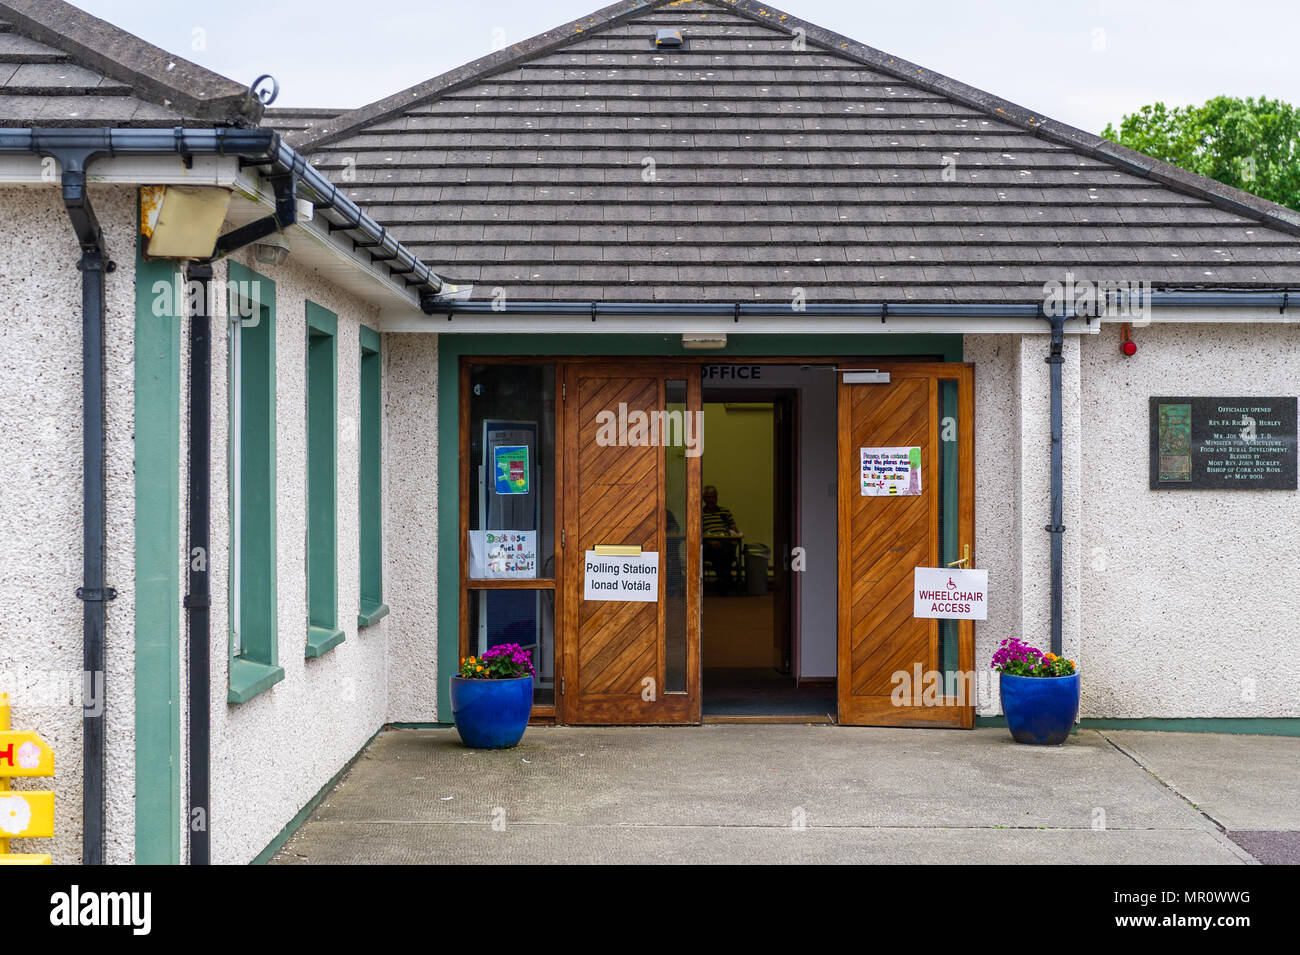 Schull, Ireland. 25th May, 2018. Today is referendum day on the Eighth Amendment of the Constitution Act 1983 which bans mothers from having abortions. The vote today is whether to retain or repeal the constitutional ban on abortion. Pictured is the polling station in Scoil Mhuire National School, Schull, West Cork, Ireland. Credit: Andy Gibson/Alamy Live News. Stock Photo